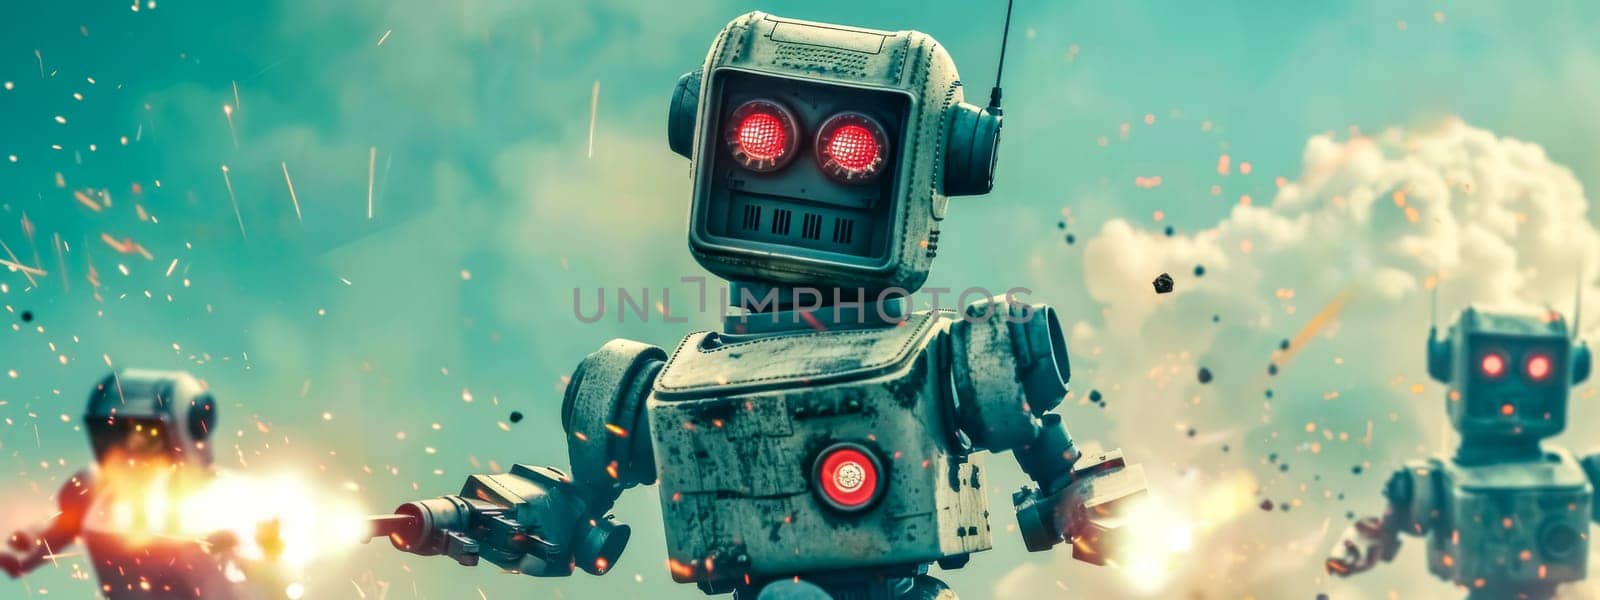 Vintage-style robots with glowing eyes engaged in a playful battle, emitting sparks by Edophoto